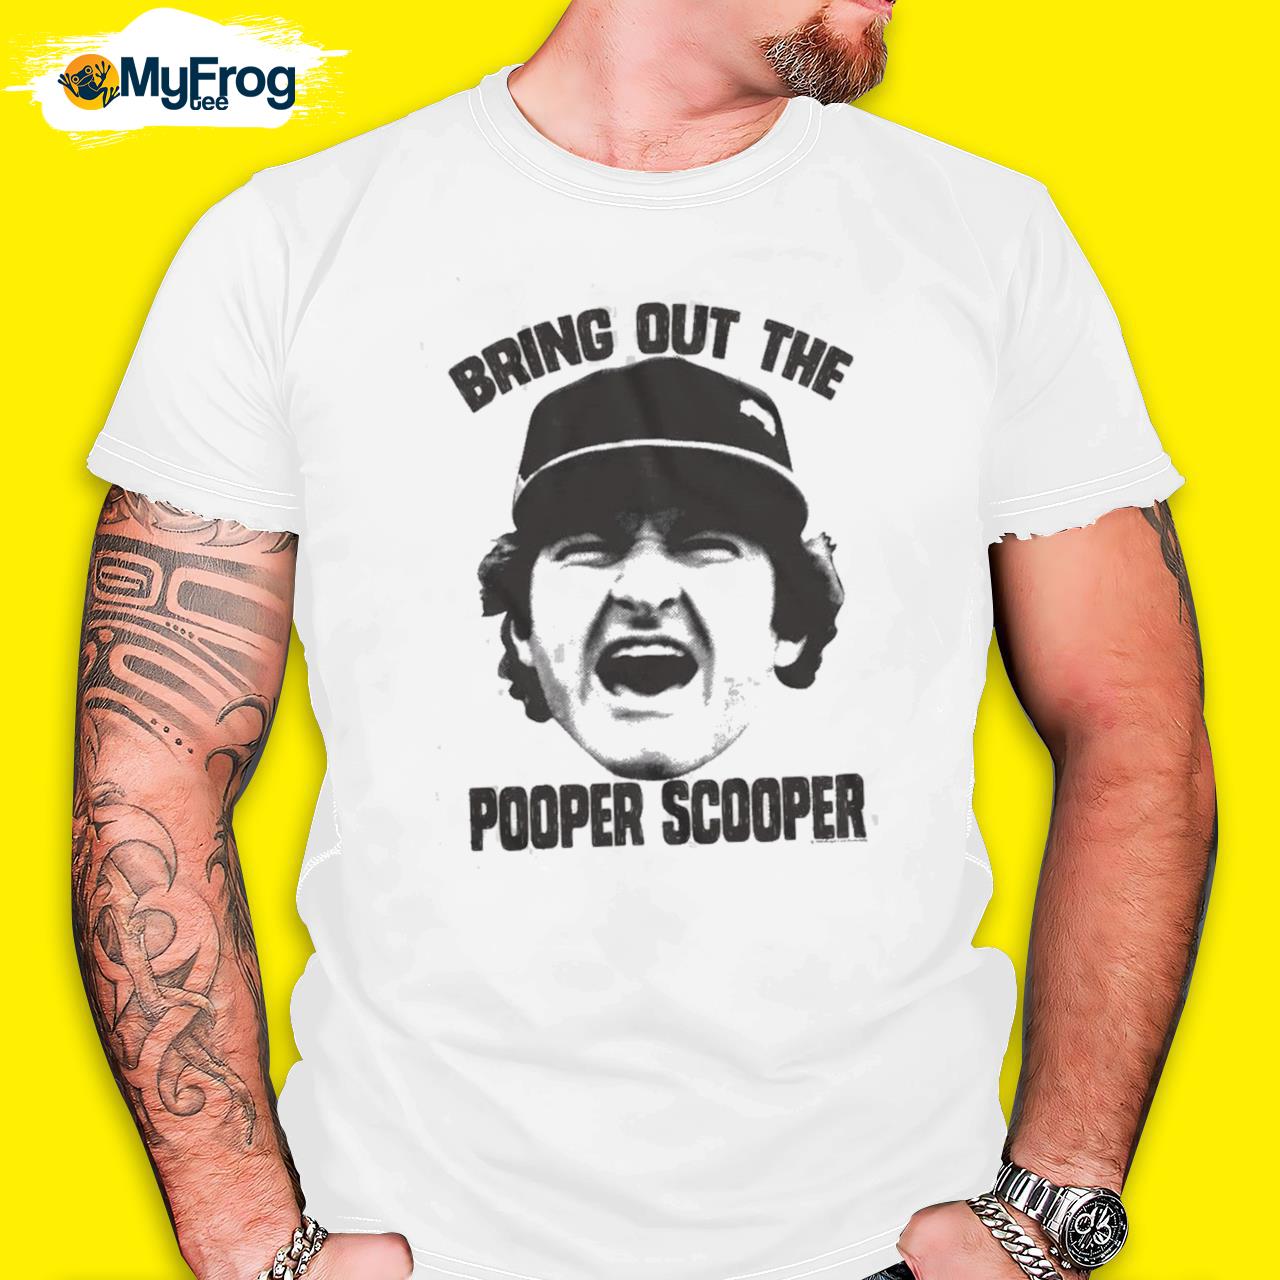 Bring out the pooper scooper shirt